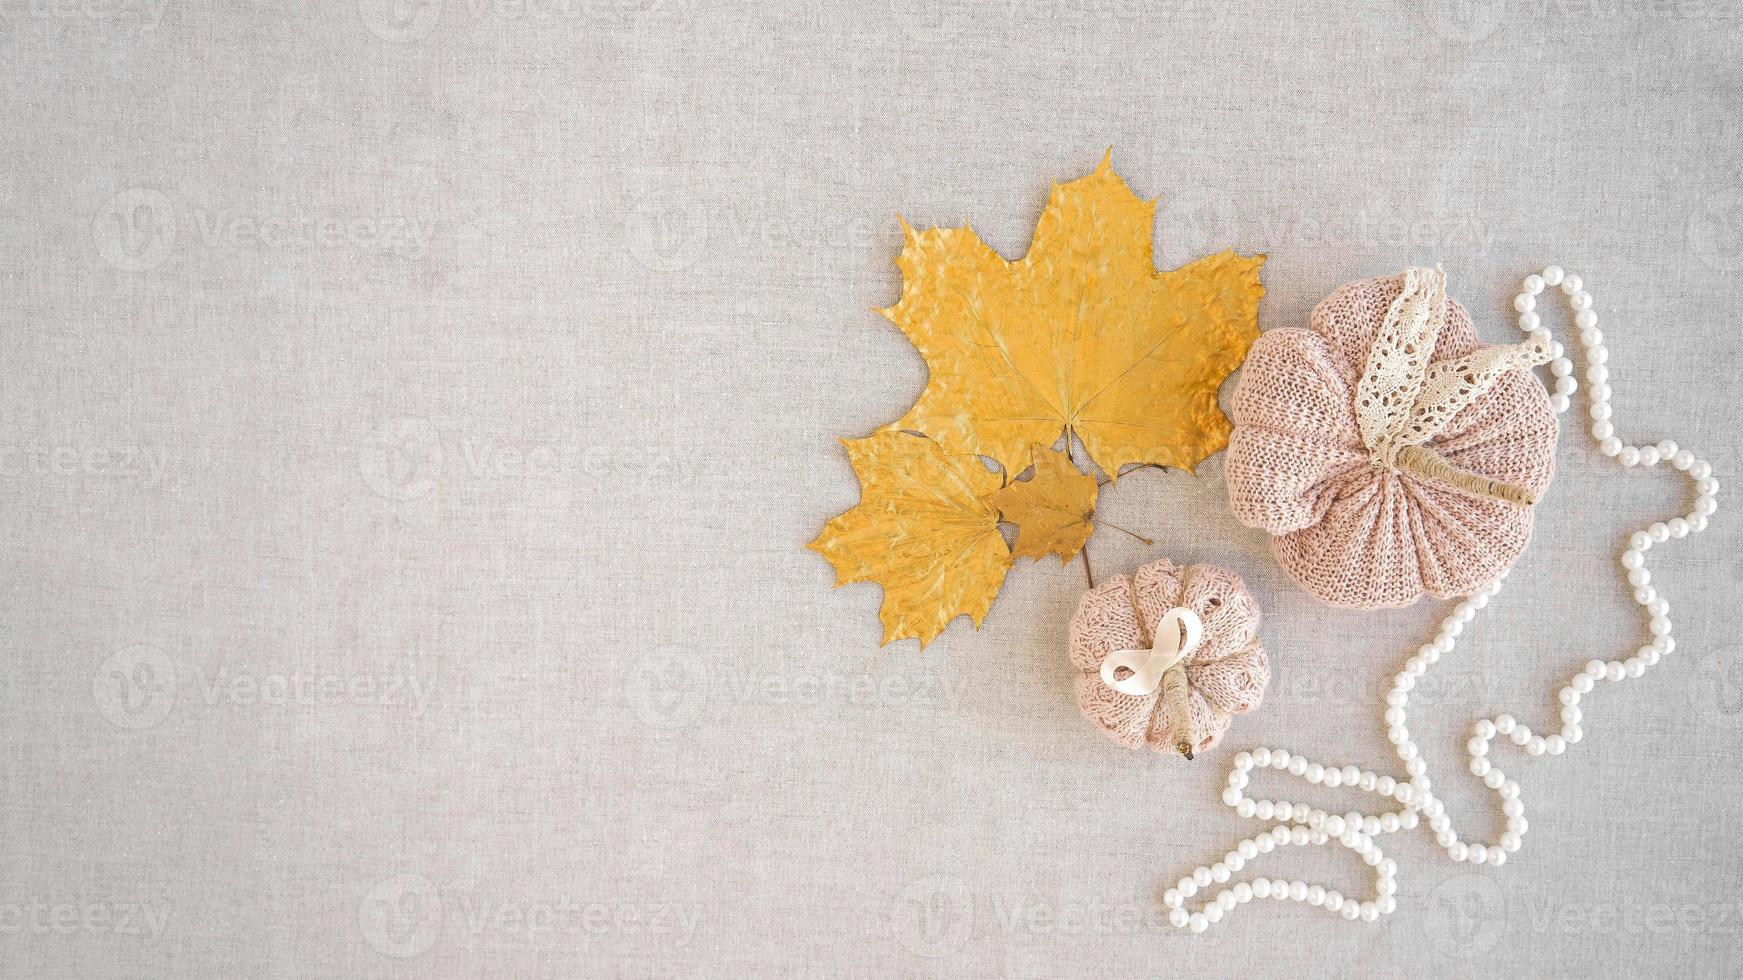 Hobby background with handmade knit pumpkins and golden maple leaves. DIY, craft decoration for fall and winter holidays. Flat lay, top view photo